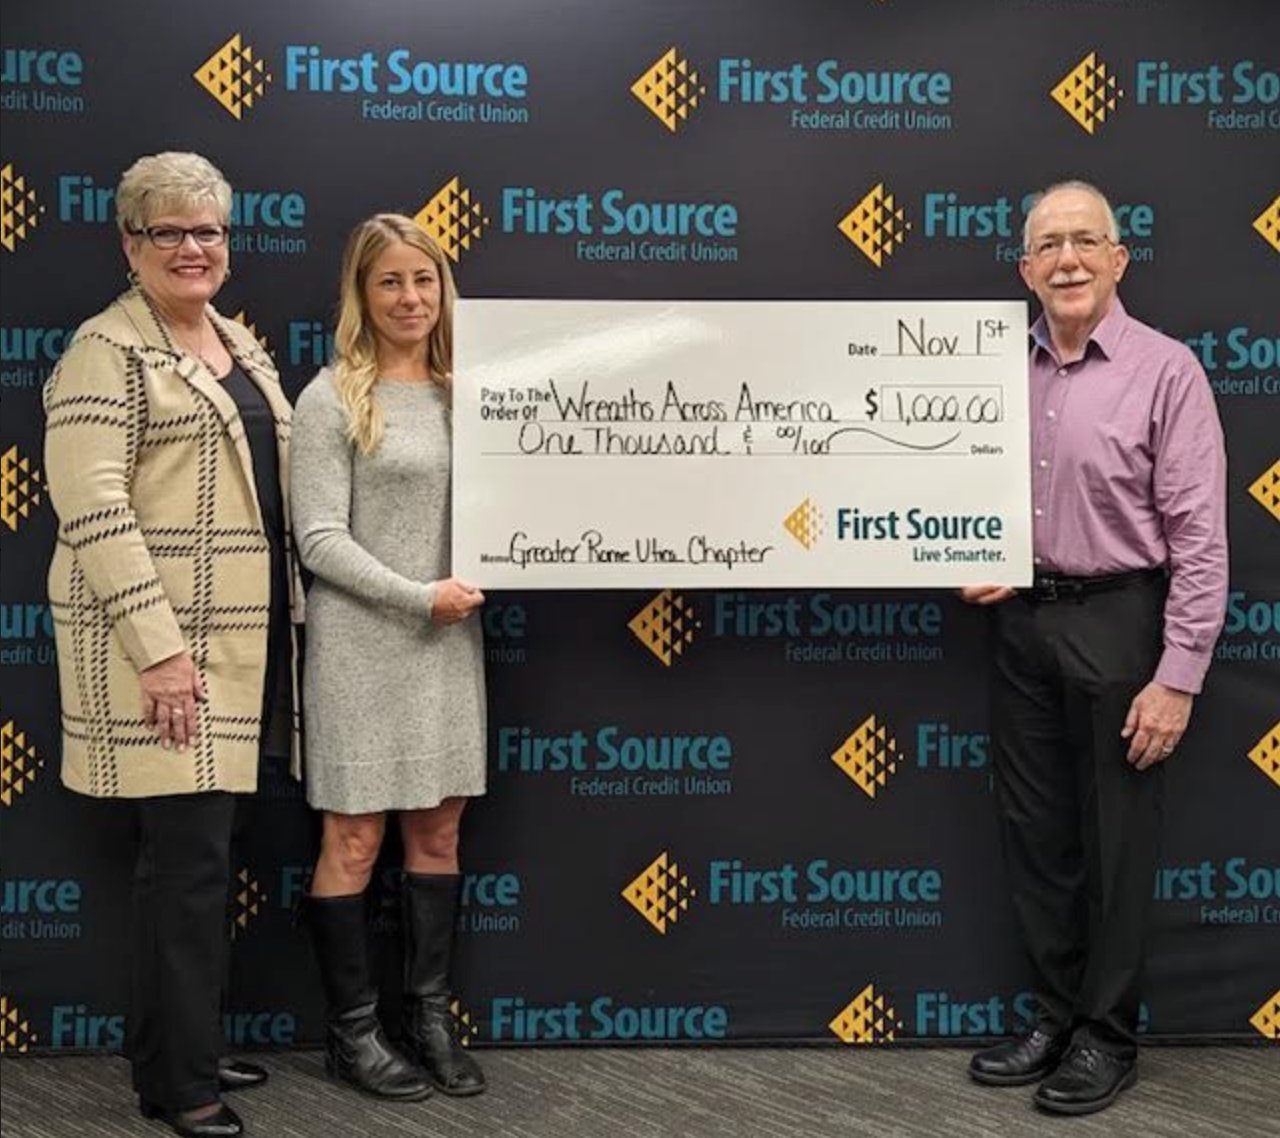 First Source Federal Credit Union is among sponsors of the local Wreaths Across America program, donating $1,000 to ensure that the area’s deceased veterans are remembered during the holidays. From left, Mariann Munson and Pam Way, First Source community relations representatives, present a check to Greg Bertolini, Greater Rome-Utica Chapter, Military Officers Association of America president.